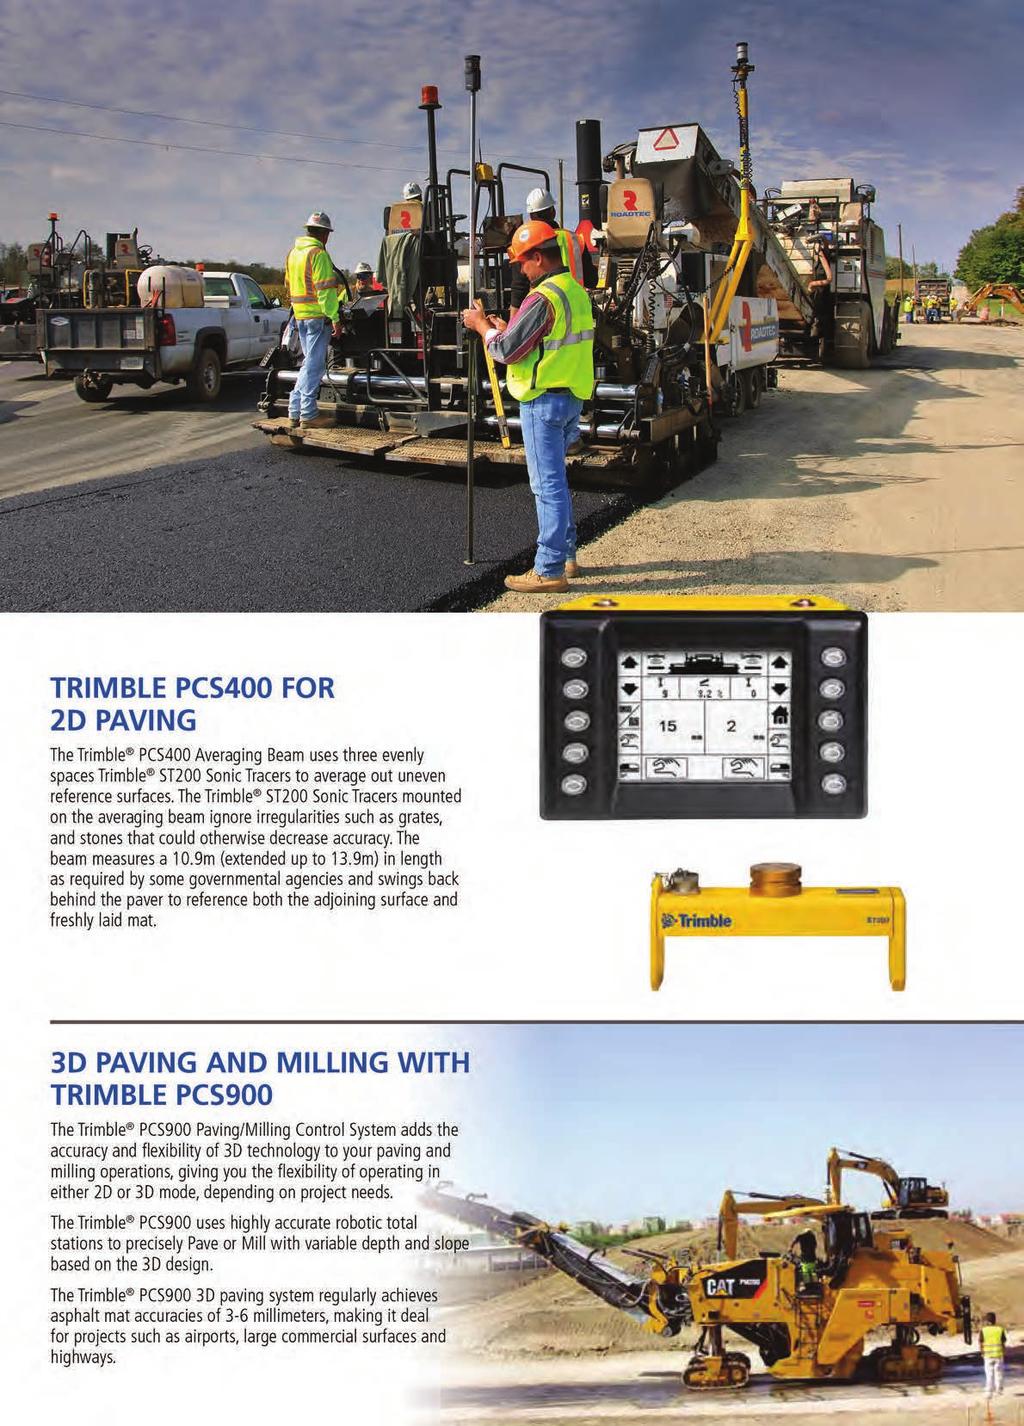 2D/3D PAVING CONTROL SYSTEMS FOR PAVERS AND MILLING OPERATIONS TRIMBLE PCS400 FOR 2D PAVING The Trimble PCS400 Averaging Beam uses three evenly spaced Trimble ST200 Sonic Tracers to average out